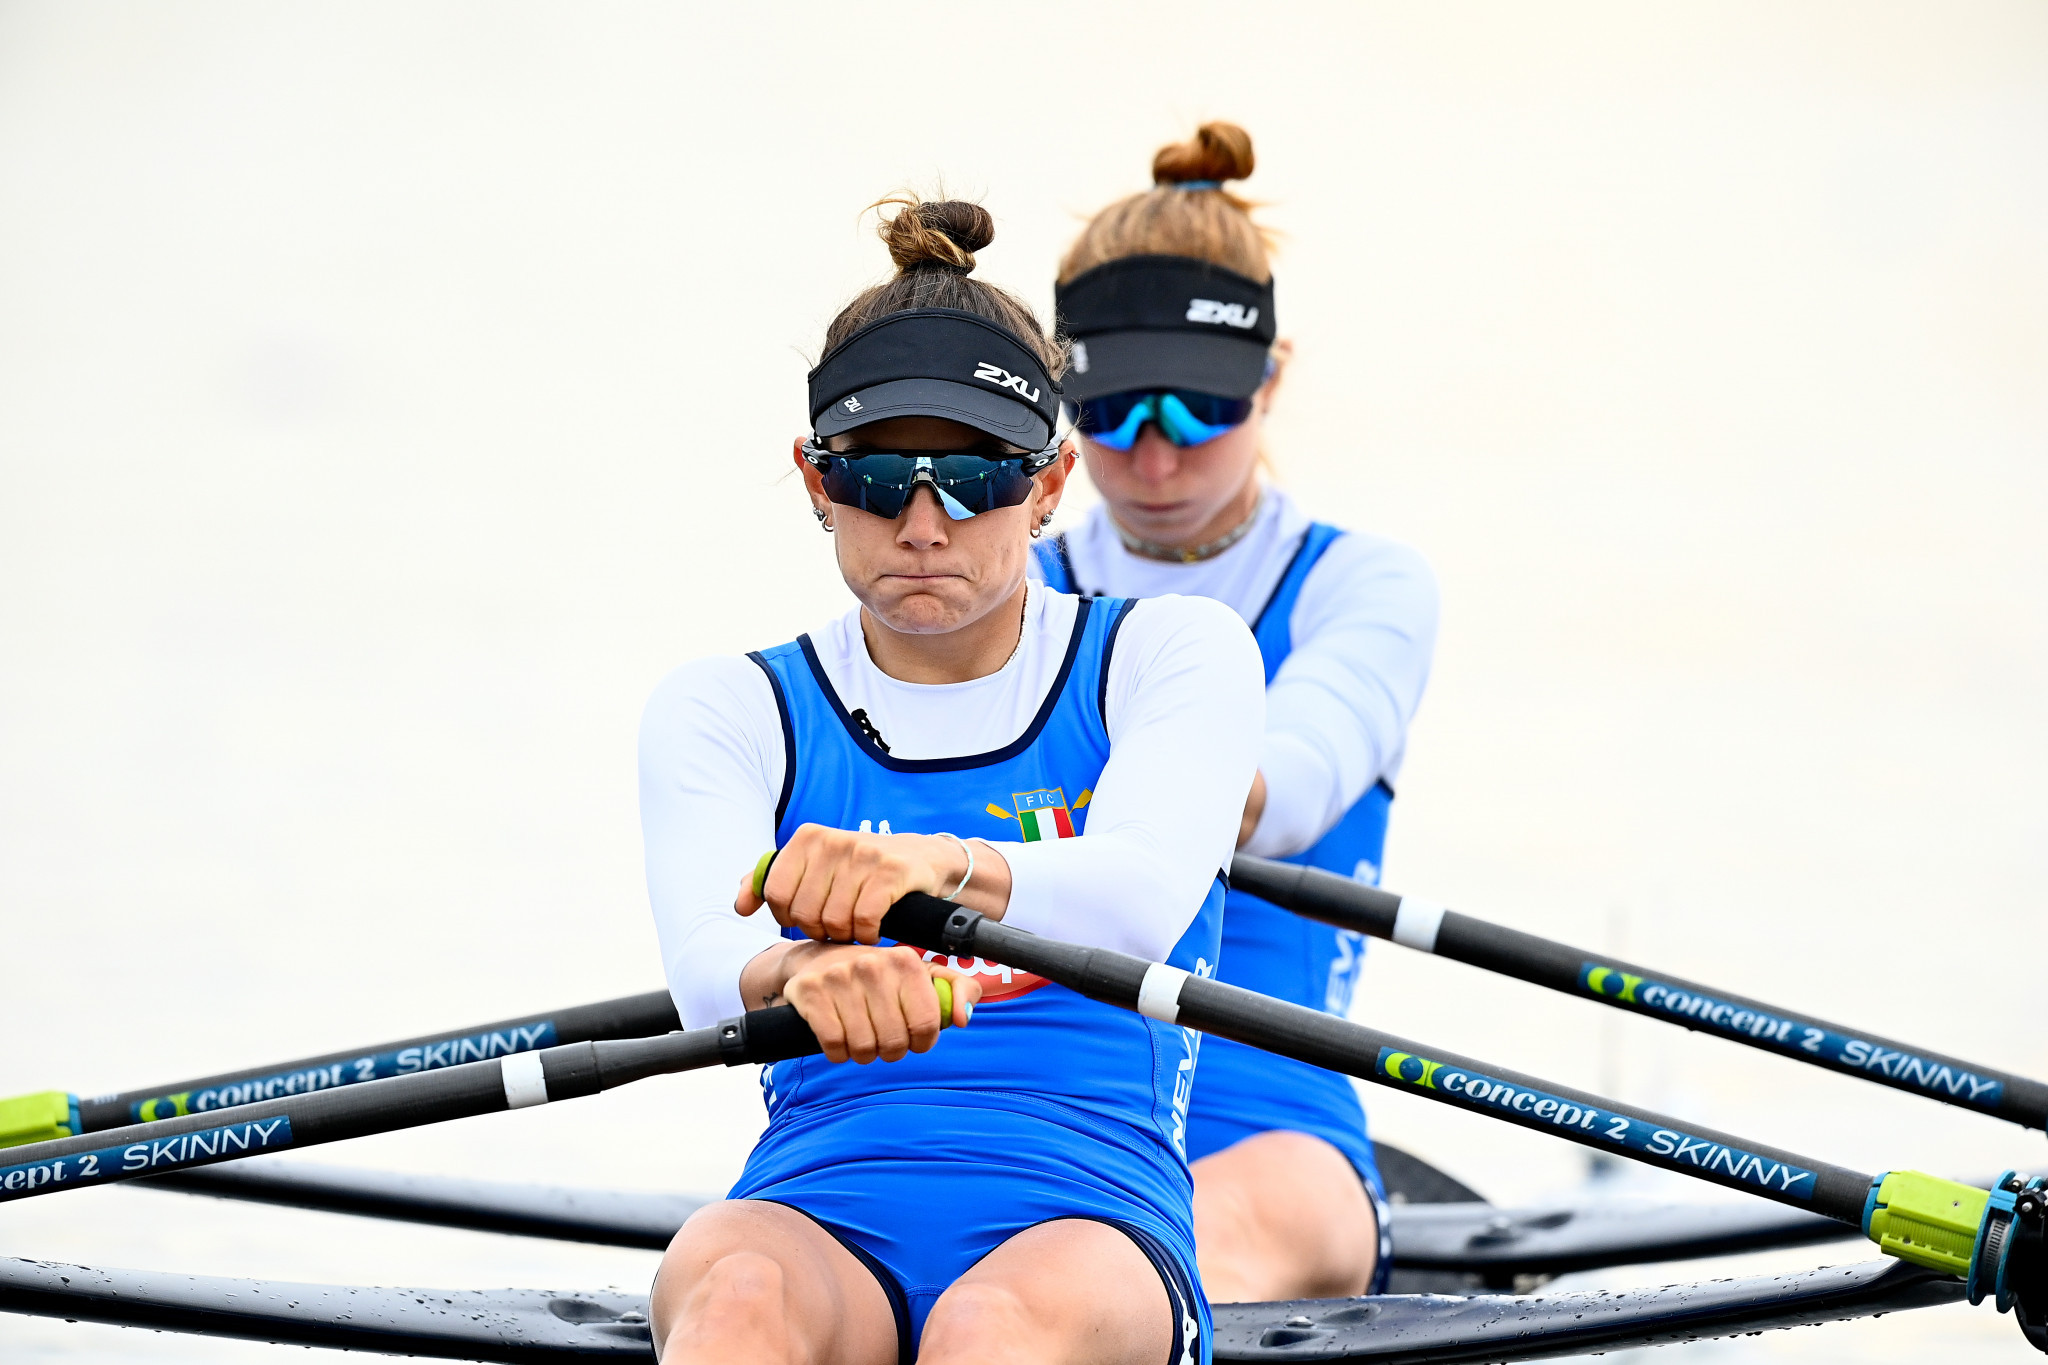 Italians Valentina Rodini and Federica Cesarini failed to clinch direct qualification in their heat at the World Rowing Championships ©Getty Images